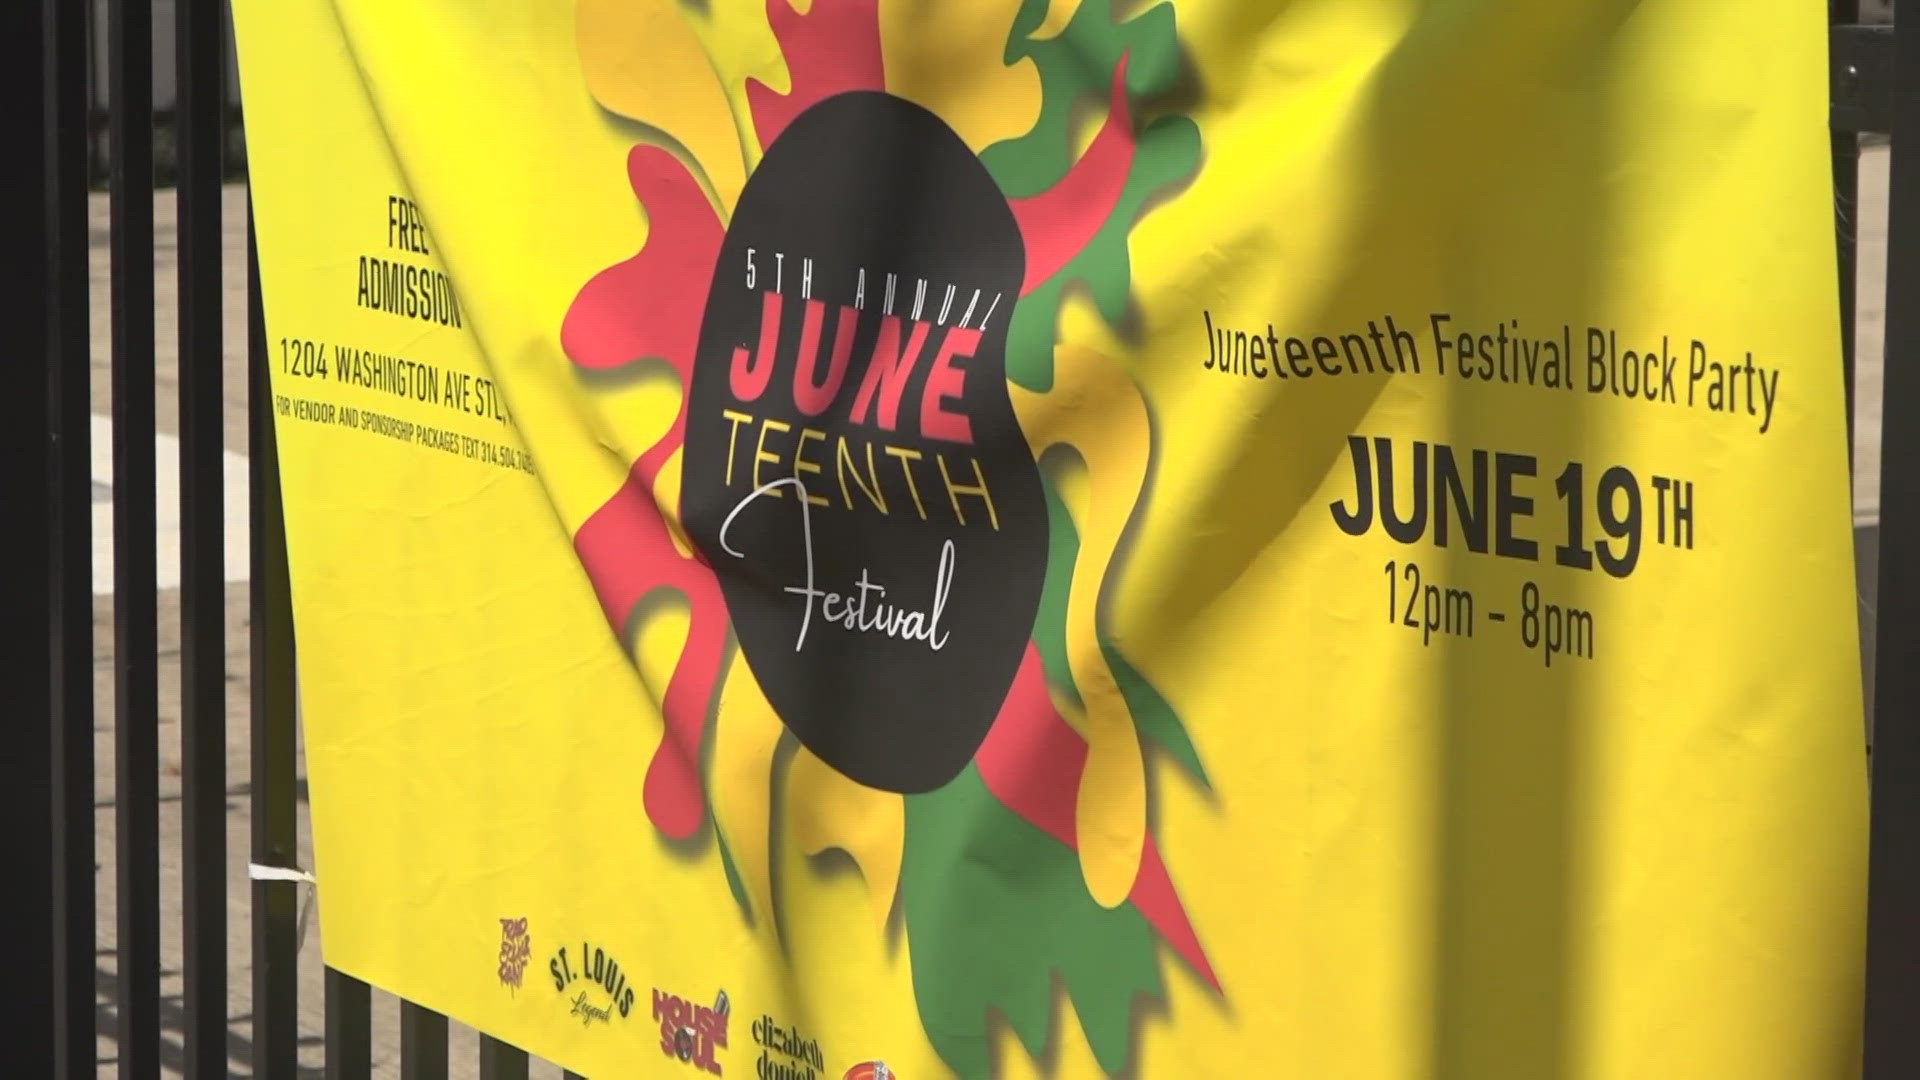 The Juneteenth Festival Block Party kicks off at noon Wednesday on Washington Avenue. Festivities will include live music, a fashion show and artist vendors.